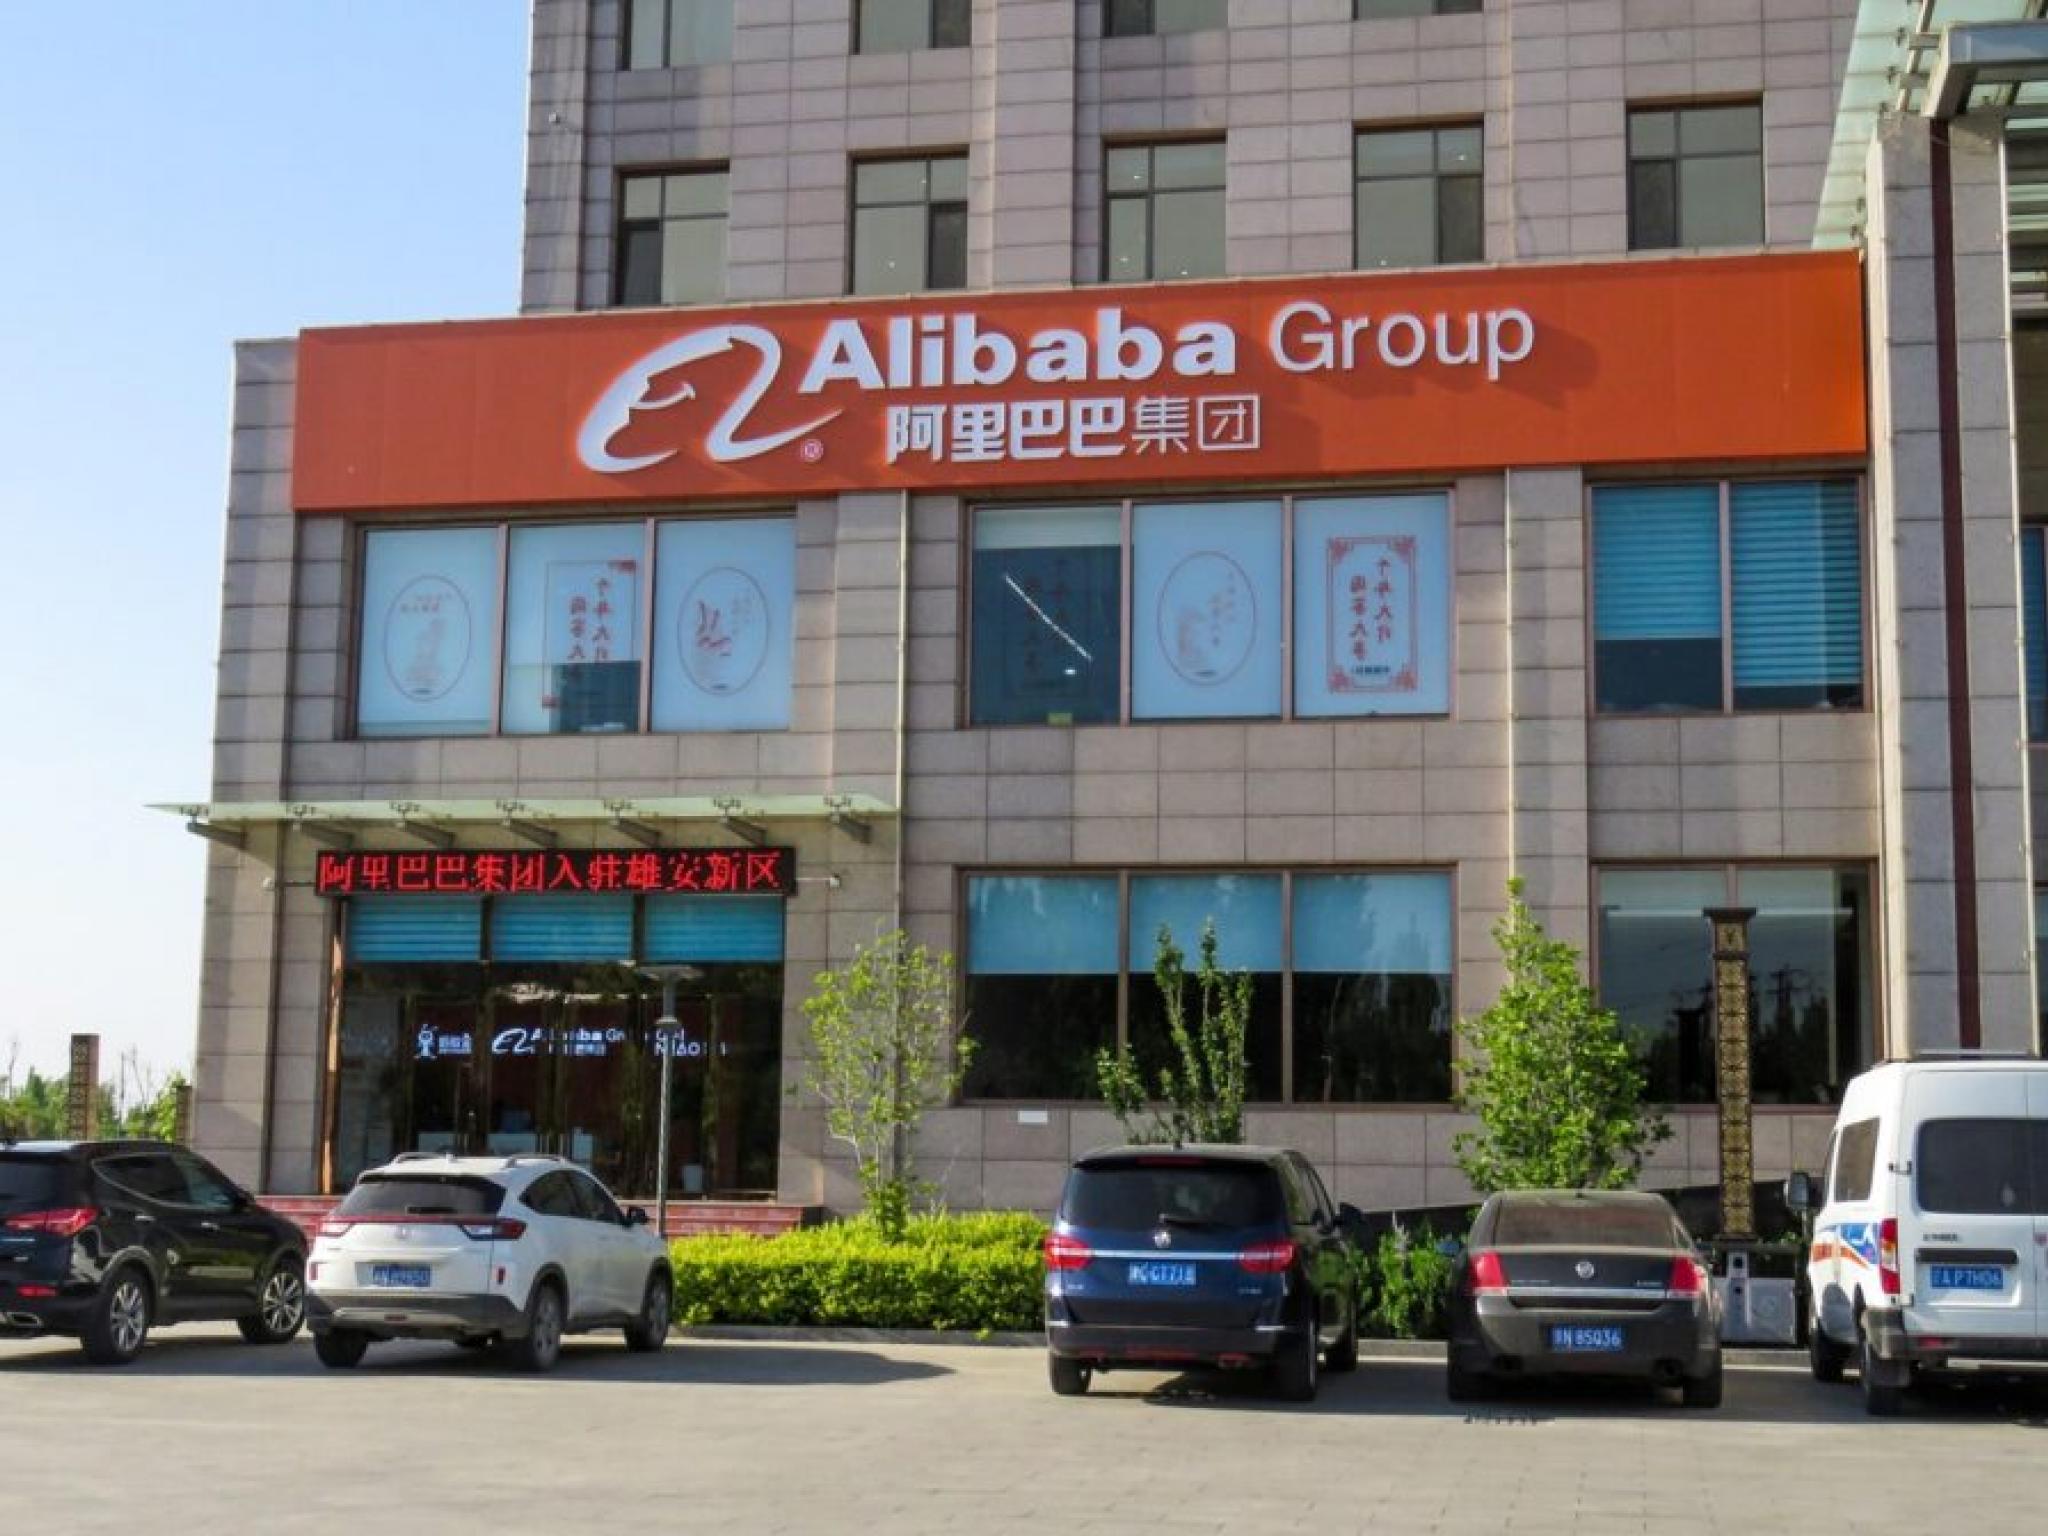  alibaba-hits-pause-on-retail-platform-to-reinvent-business-strategy-and-dive-into-ai 